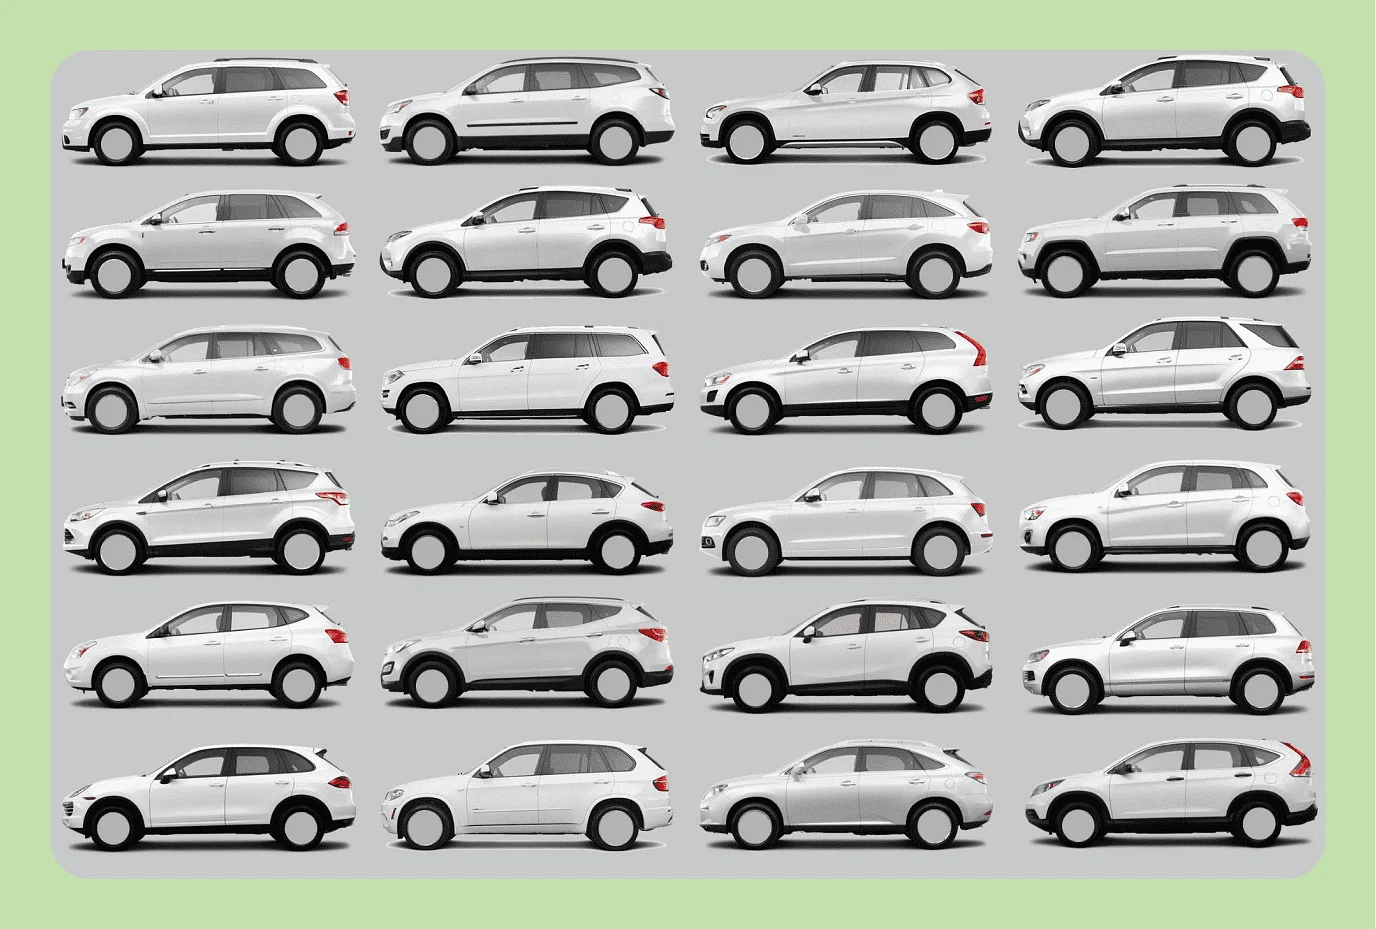 A grid of white cars that look very similar to one another.